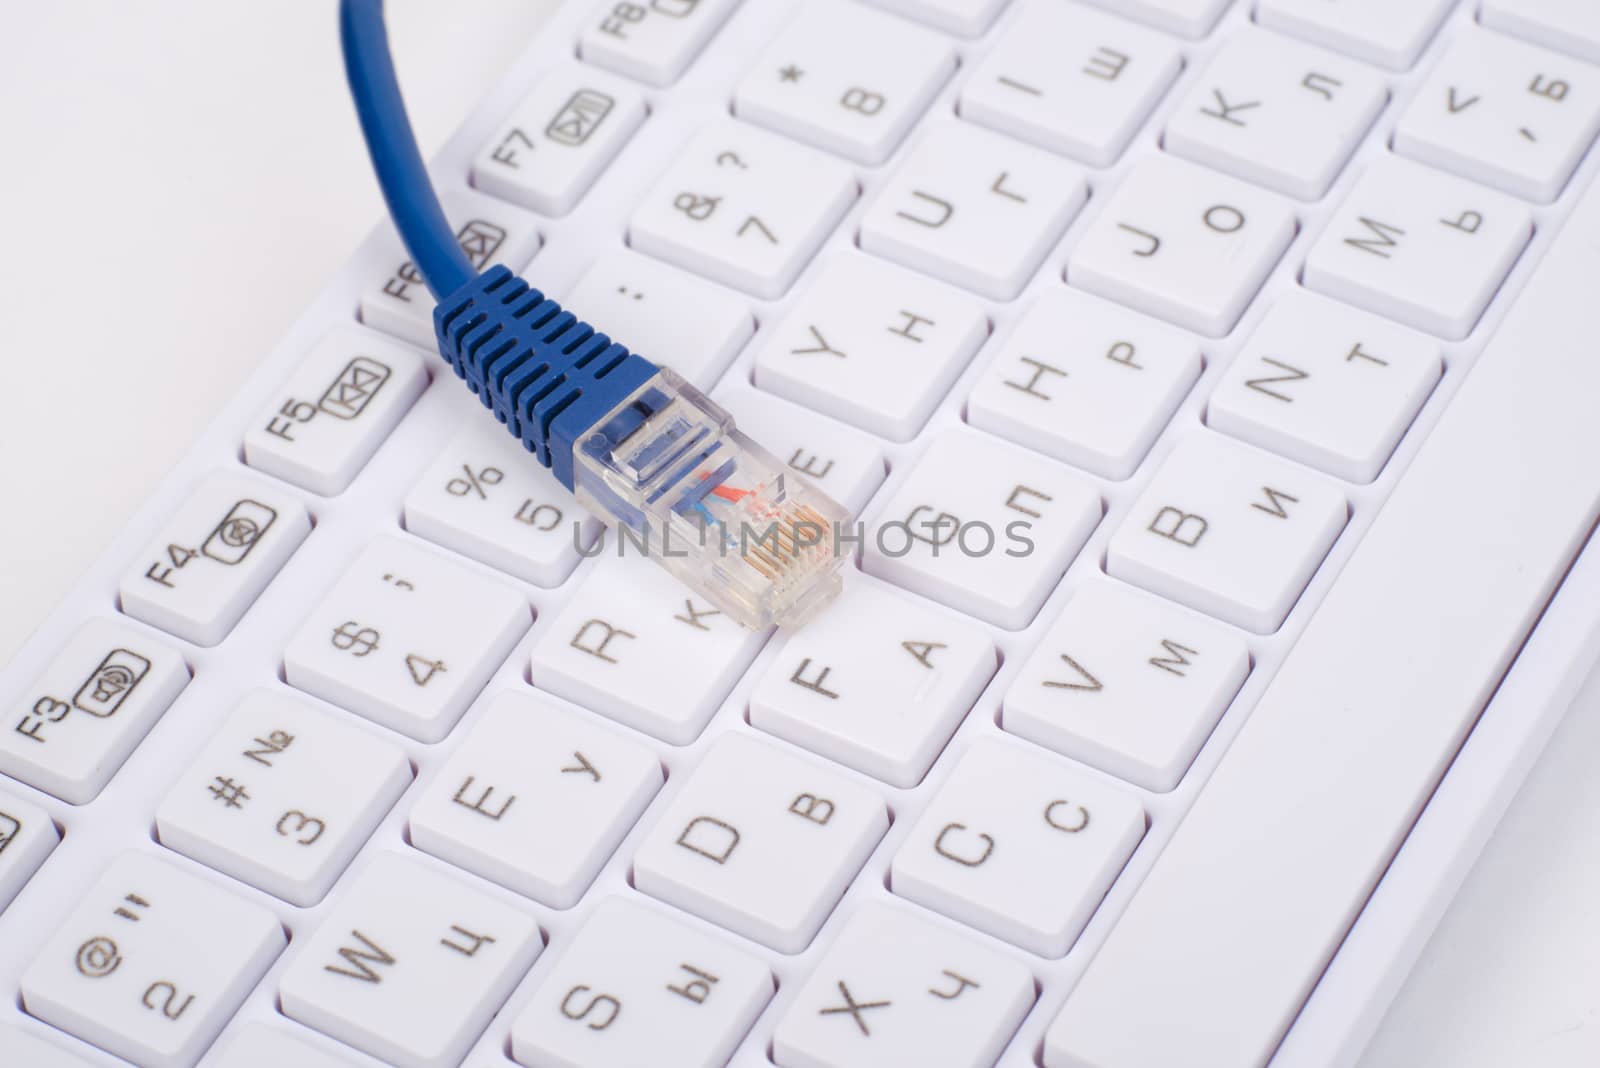 Computer keyboard with blue cable by cherezoff